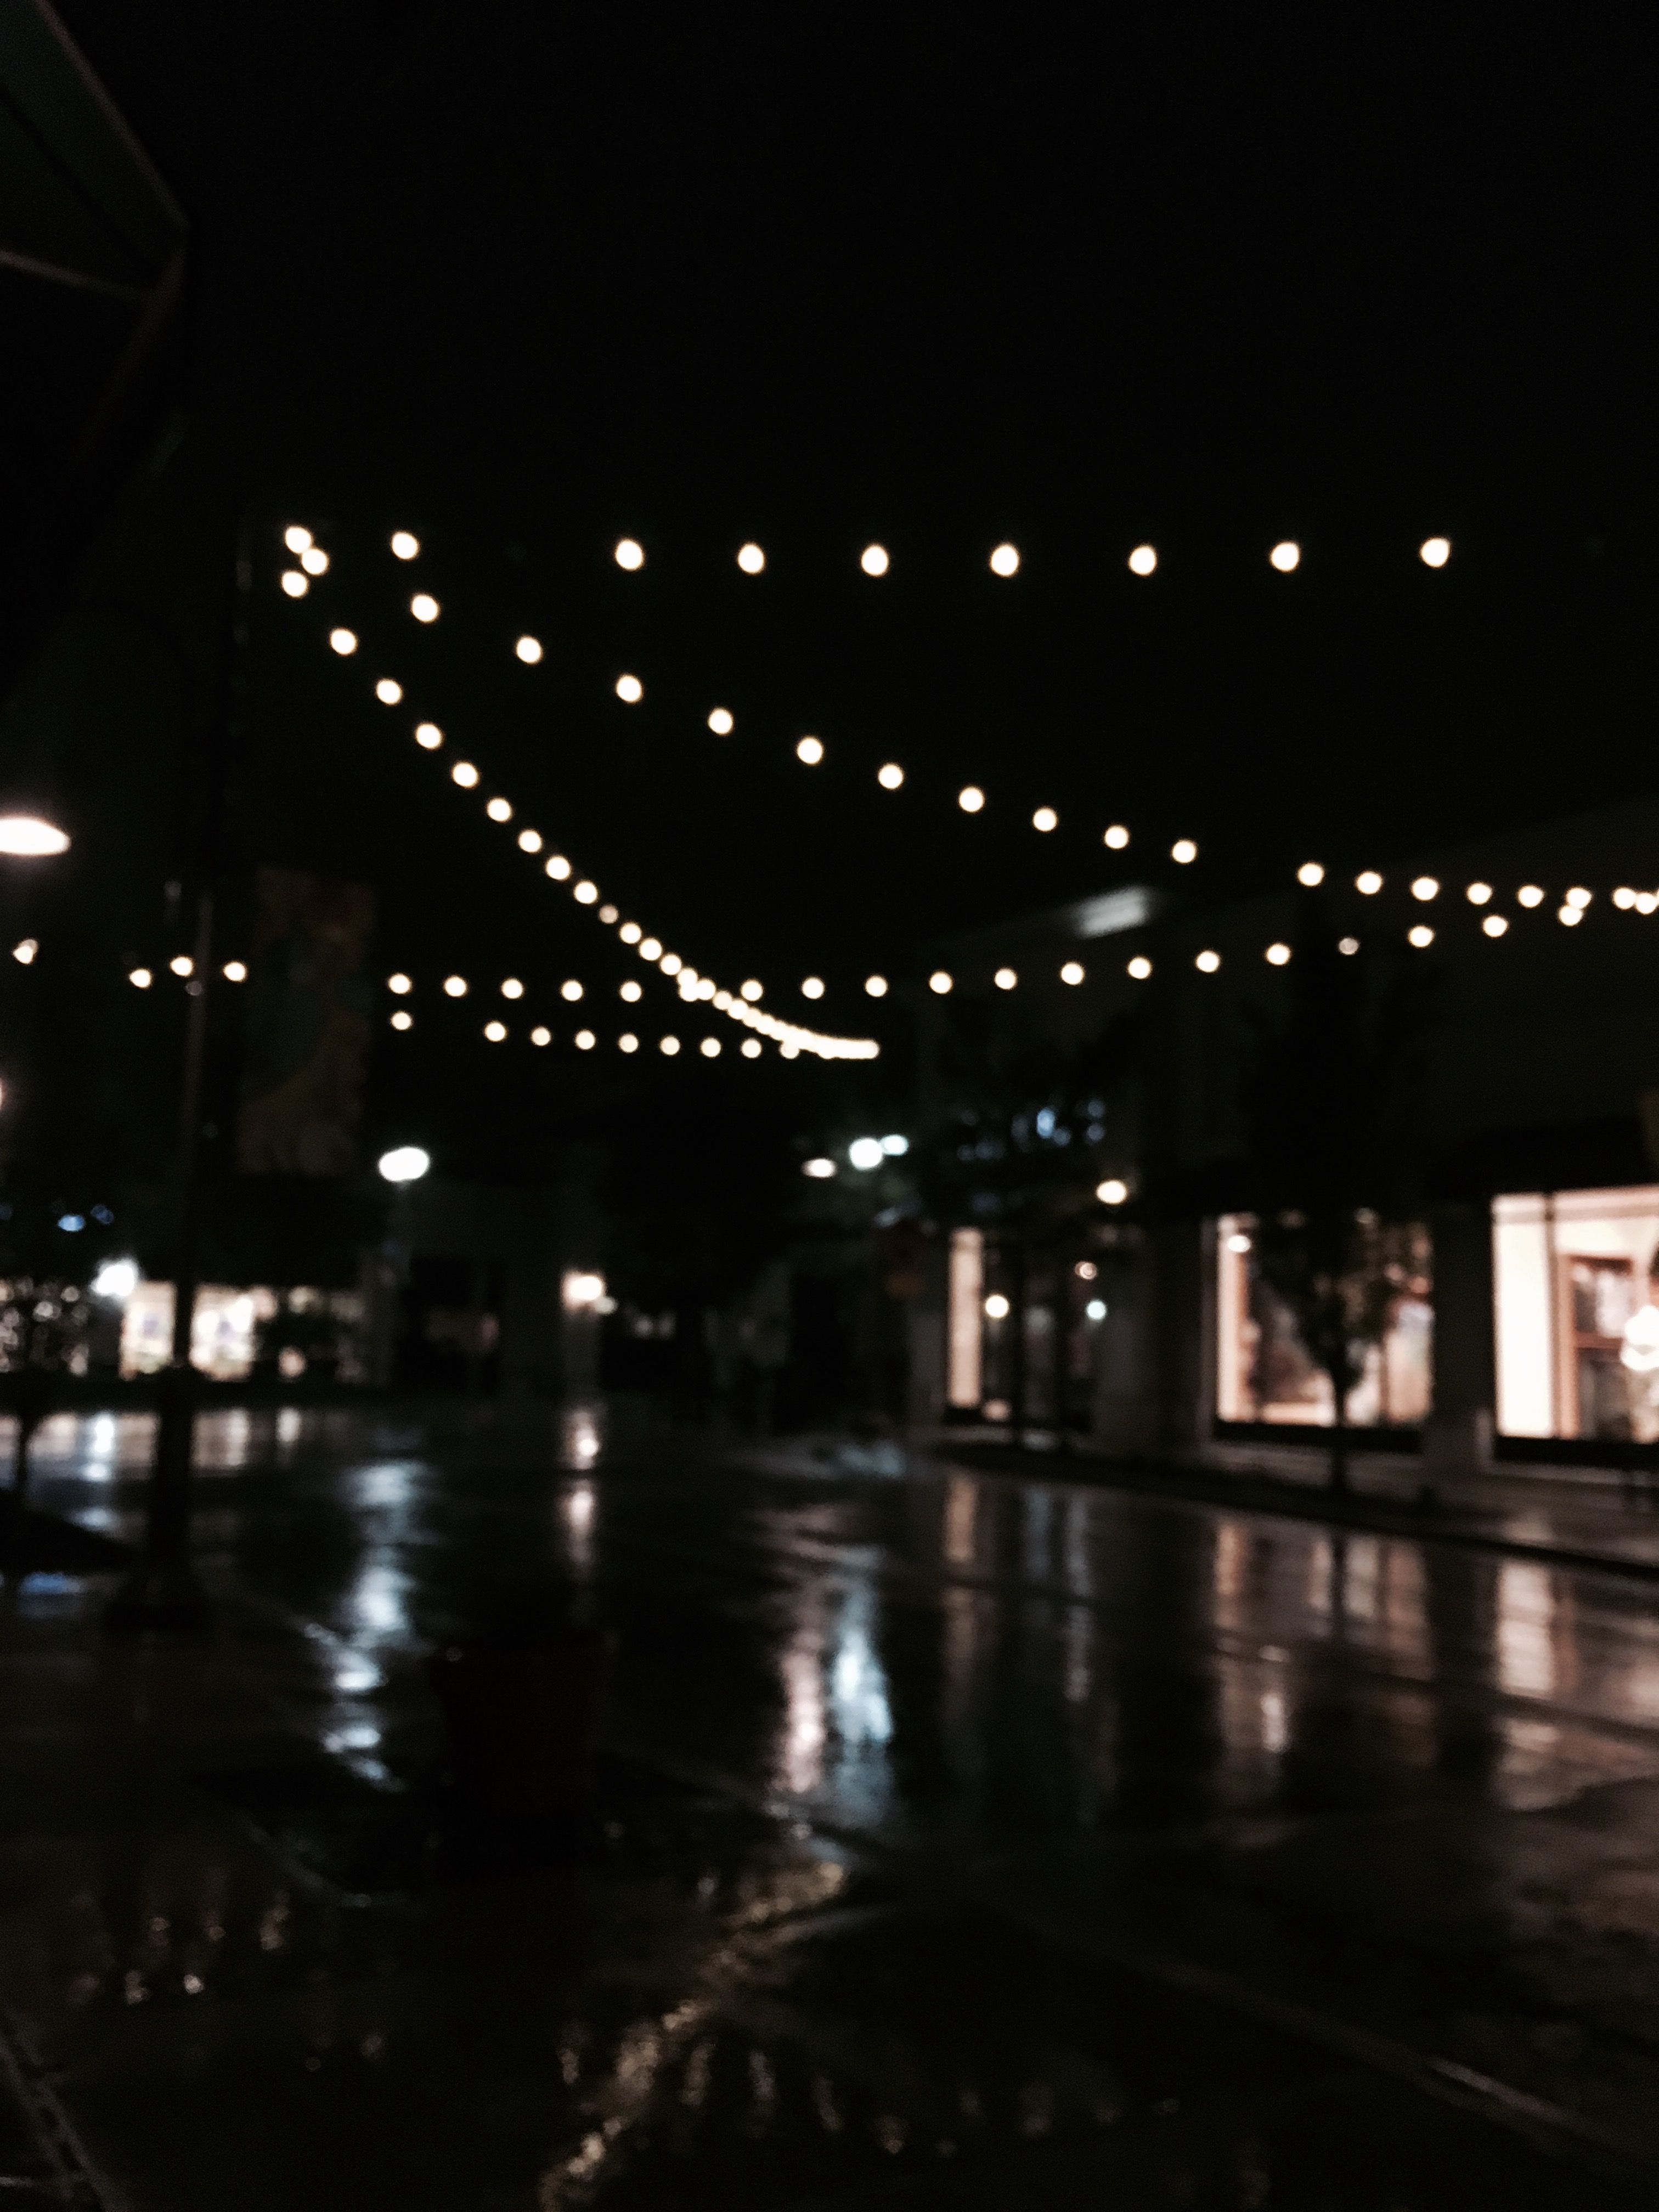 Downtown - city - lights - aesthetic - photography - tumblr ...